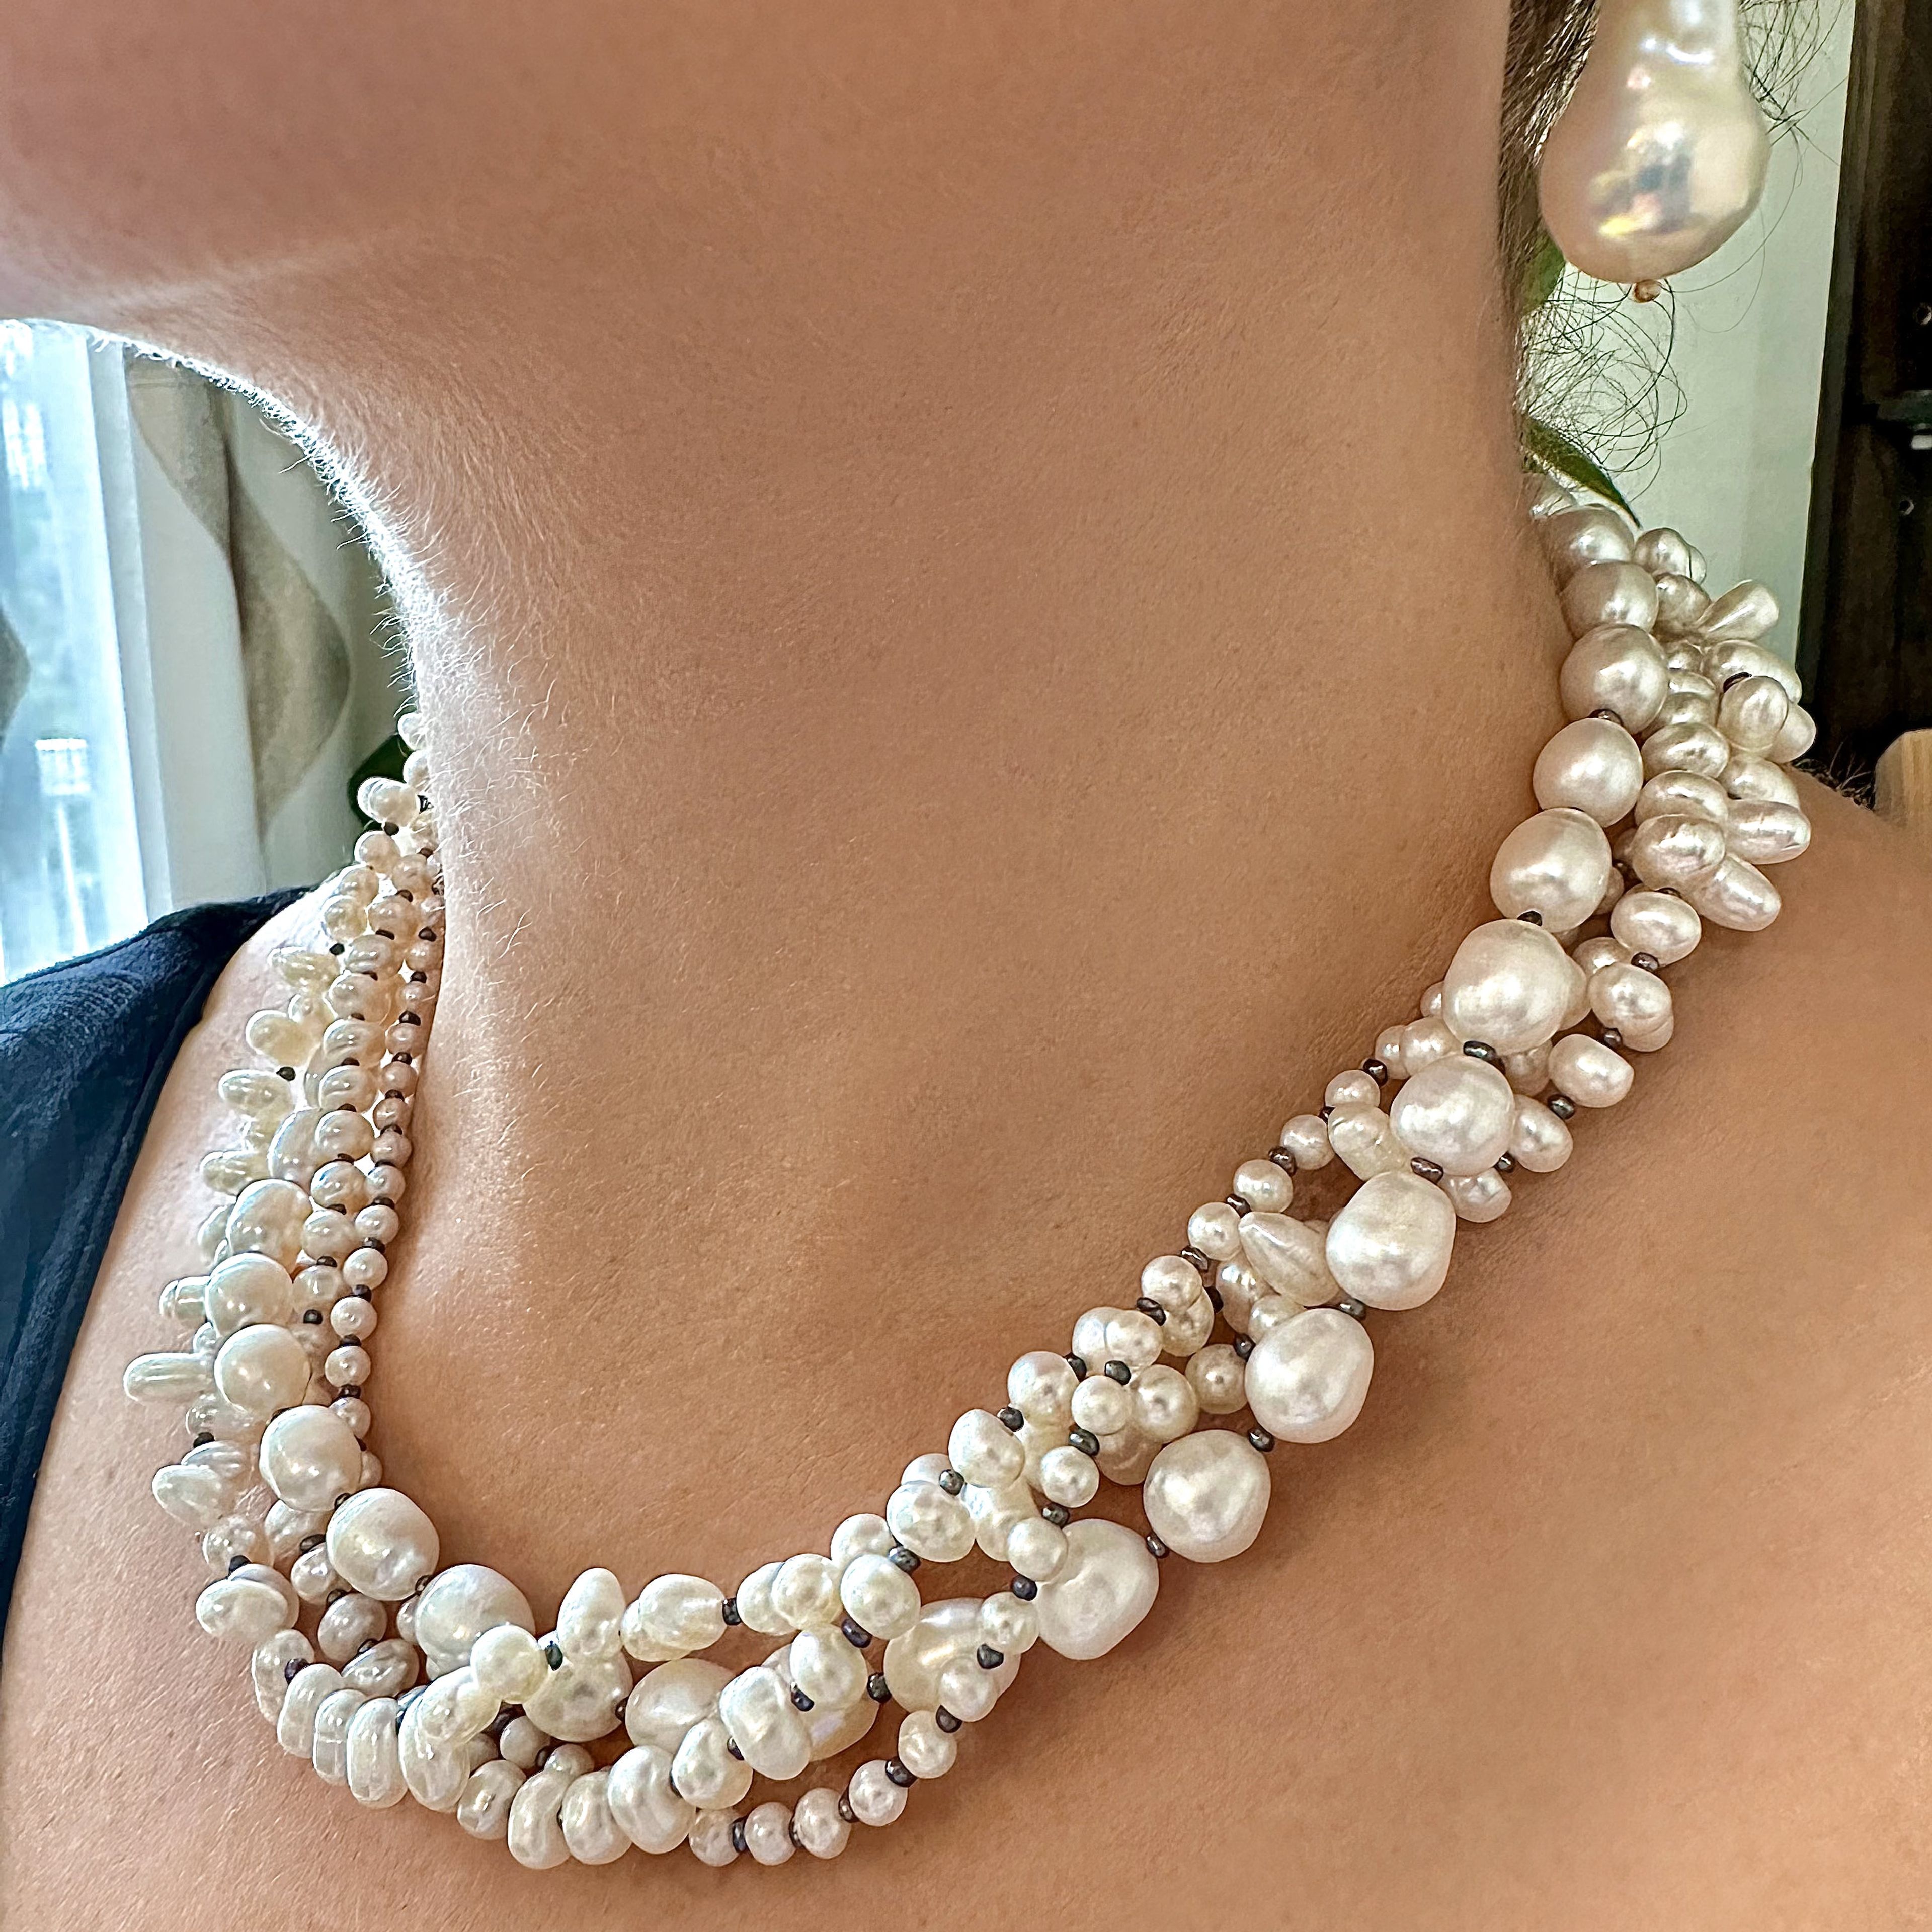 Luscious in Pearls Necklace